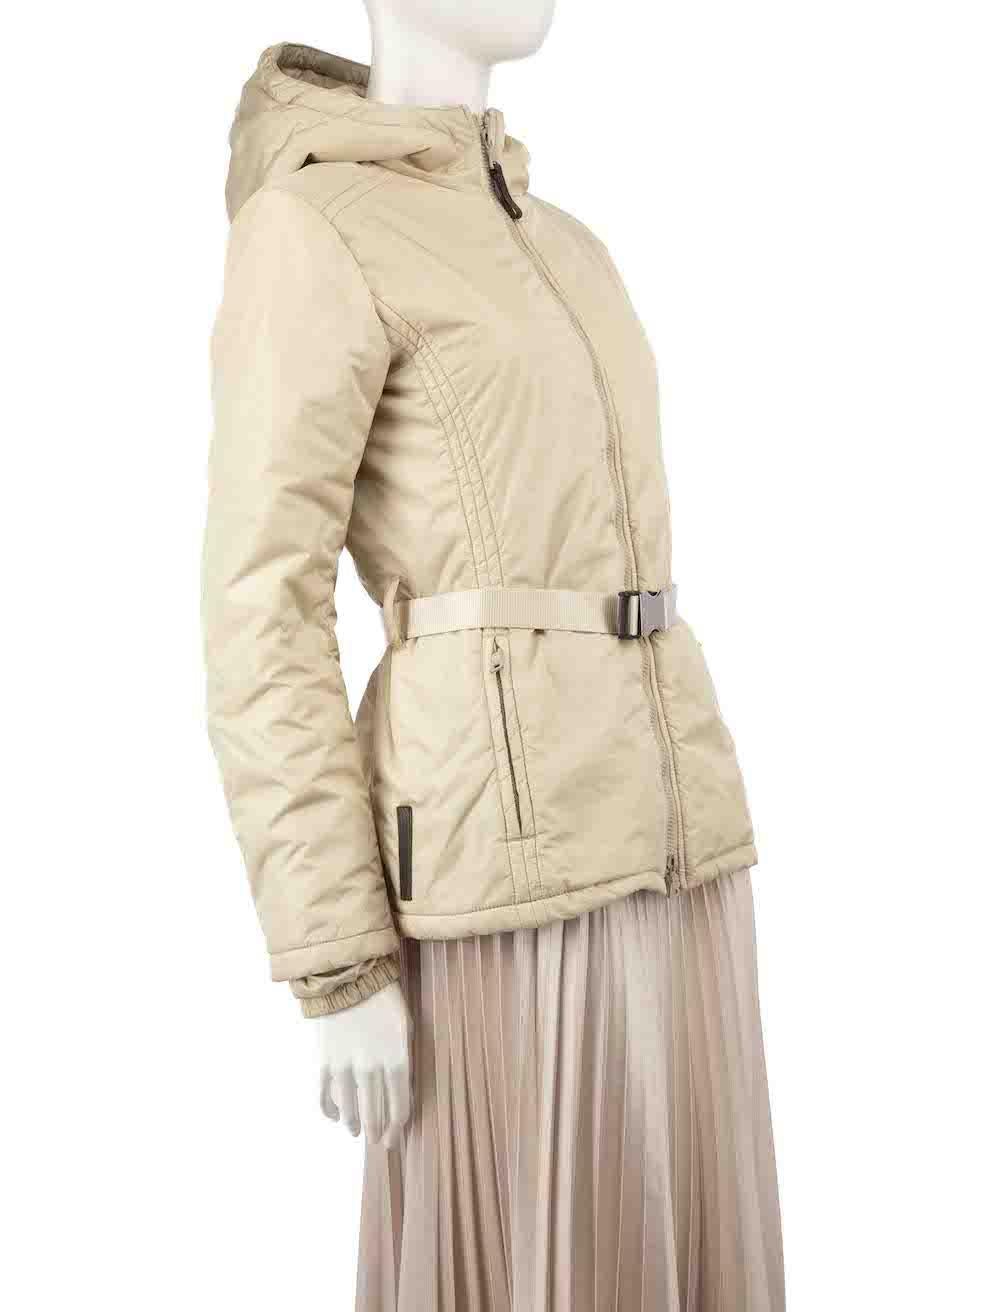 CONDITION is Very good. Minimal wear to coat is evident. Minimal wear to metal belt buckle, with some scratches and tarnishing to the pocket zip pullers on this used Prada designer resale item.
 
 
 
 Details
 
 
 Beige
 
 Synthetic
 
 Shell jacket
